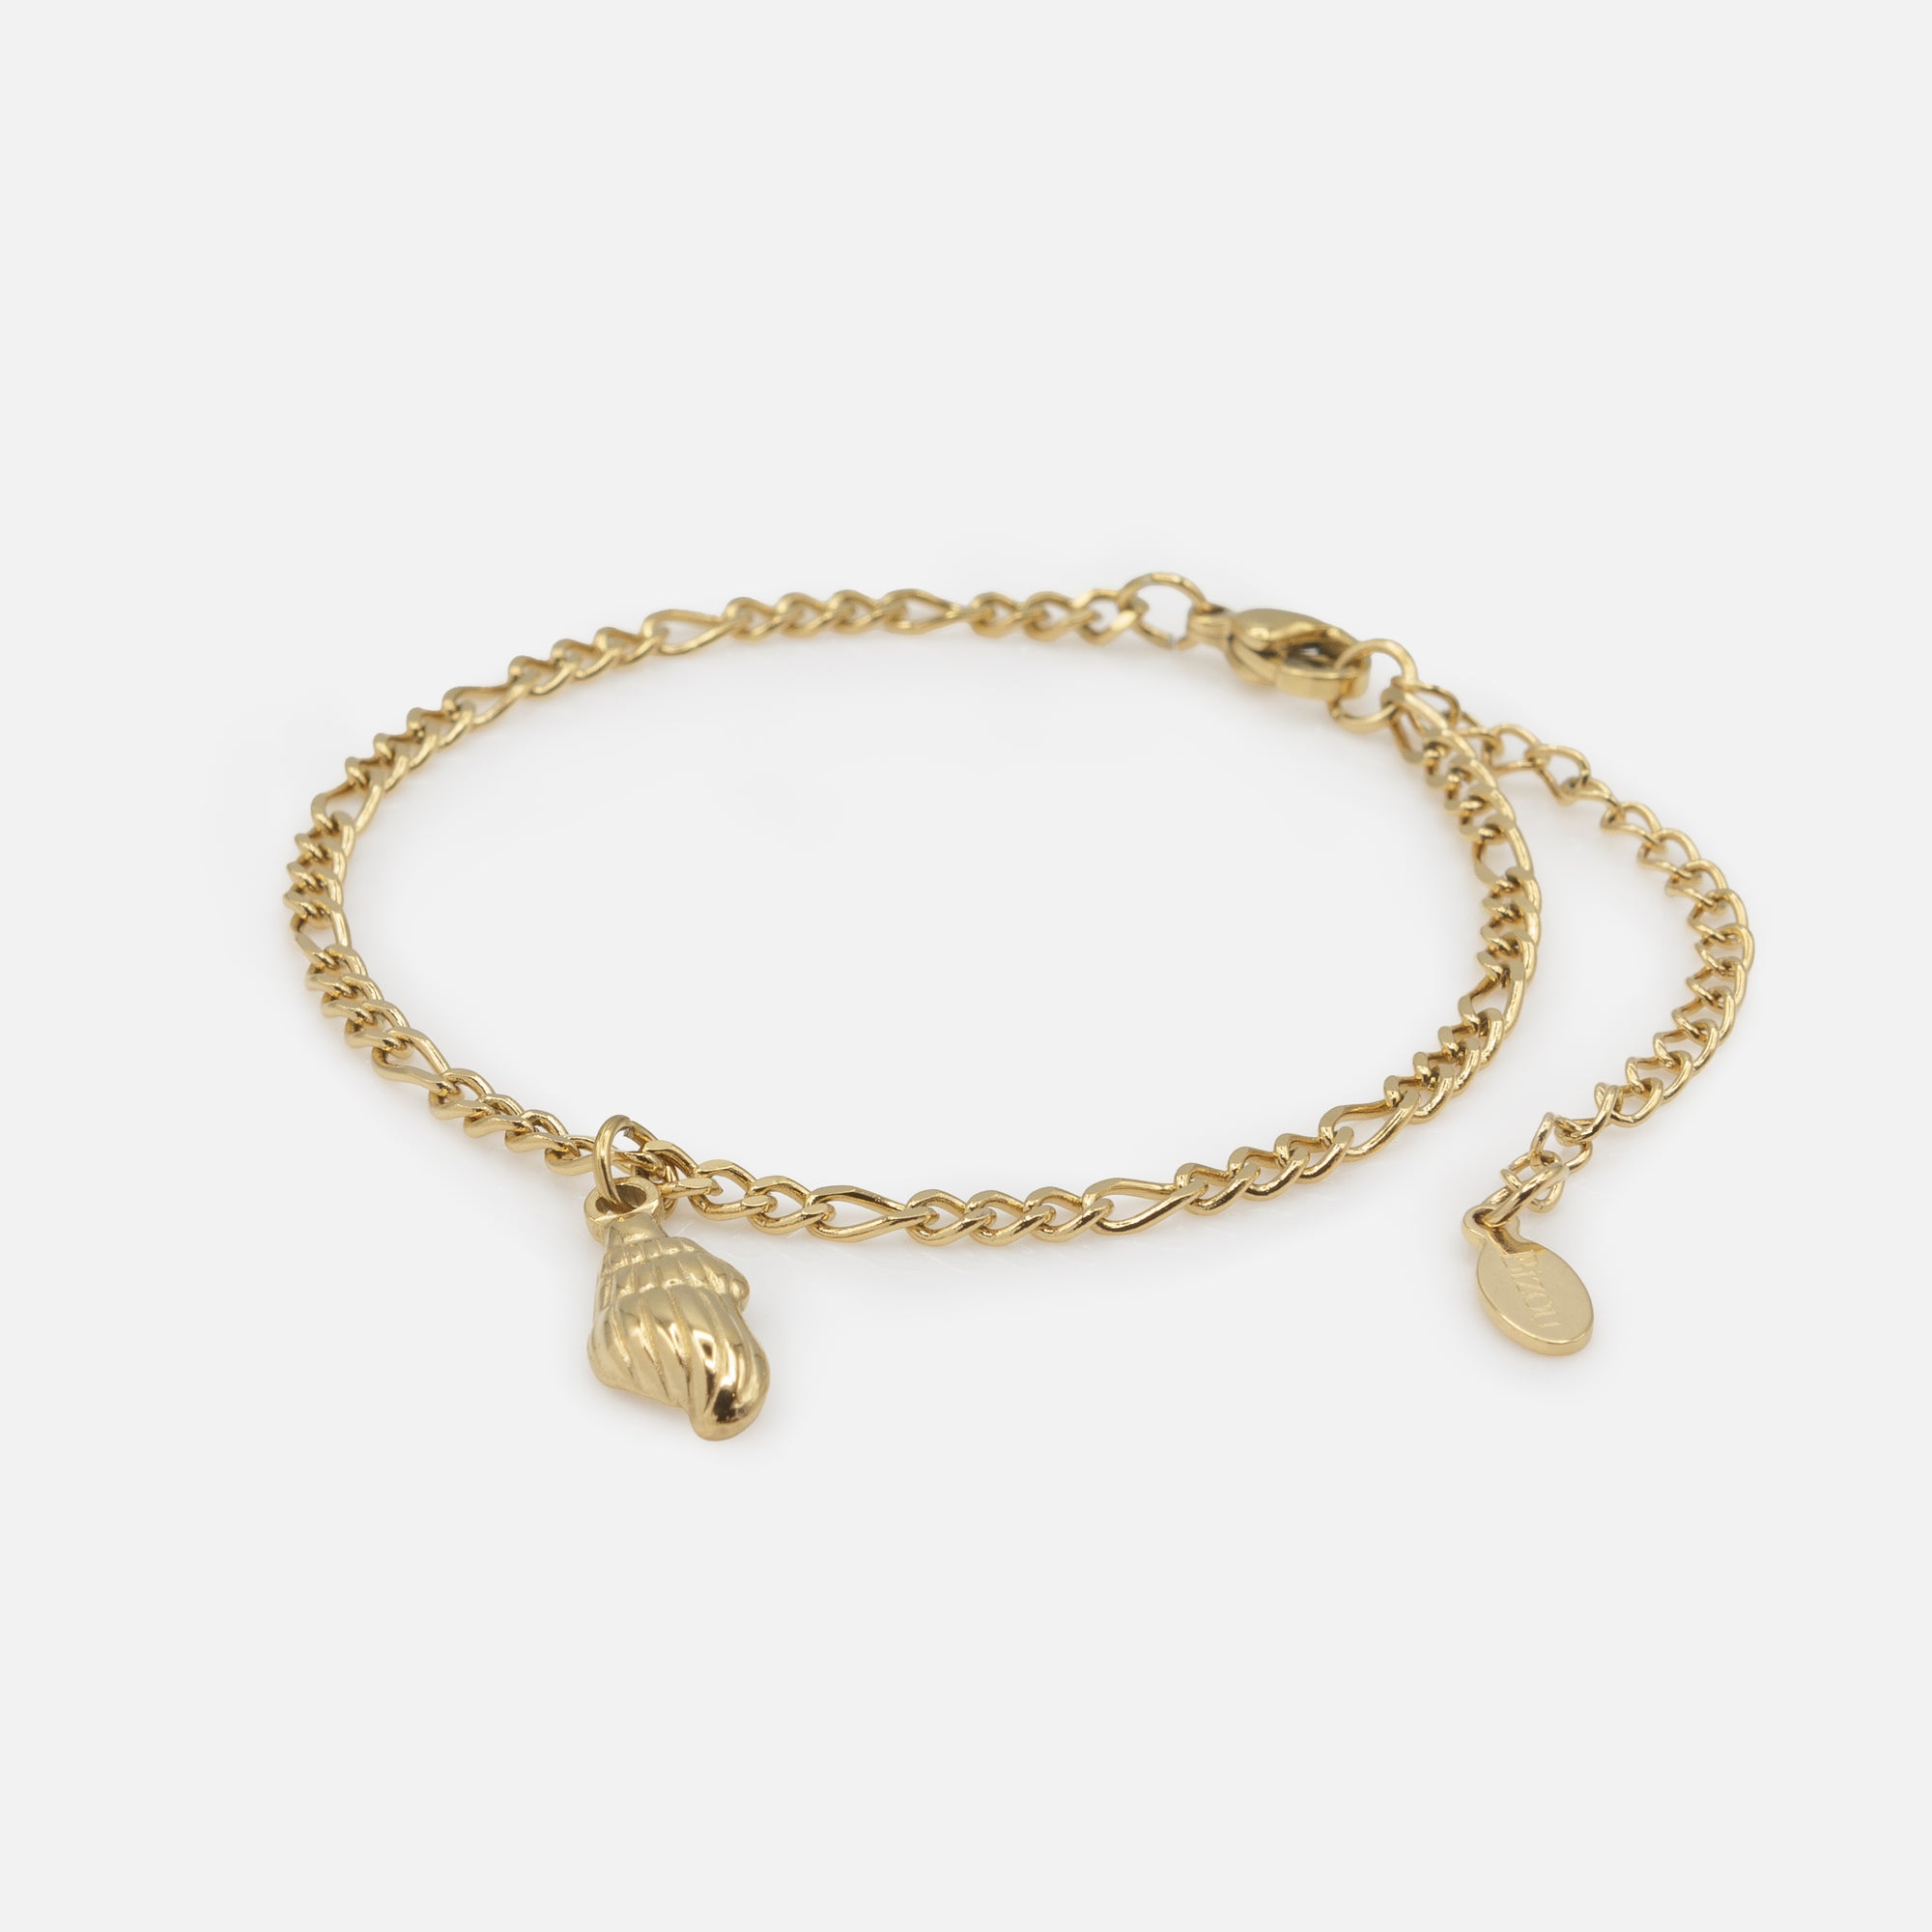 Gold figaro link bracelet with stainless steel shell charm